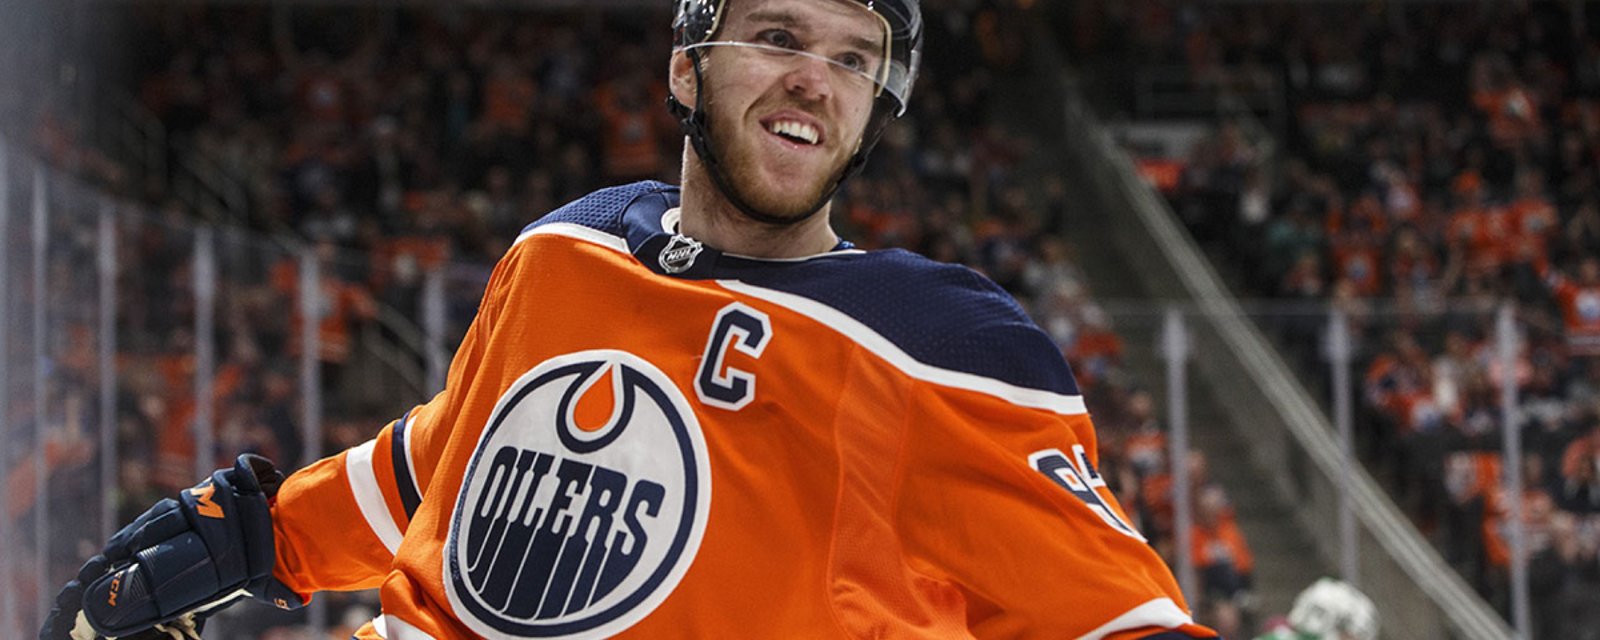 Connor McDavid makes life changing announcement on Saturday.